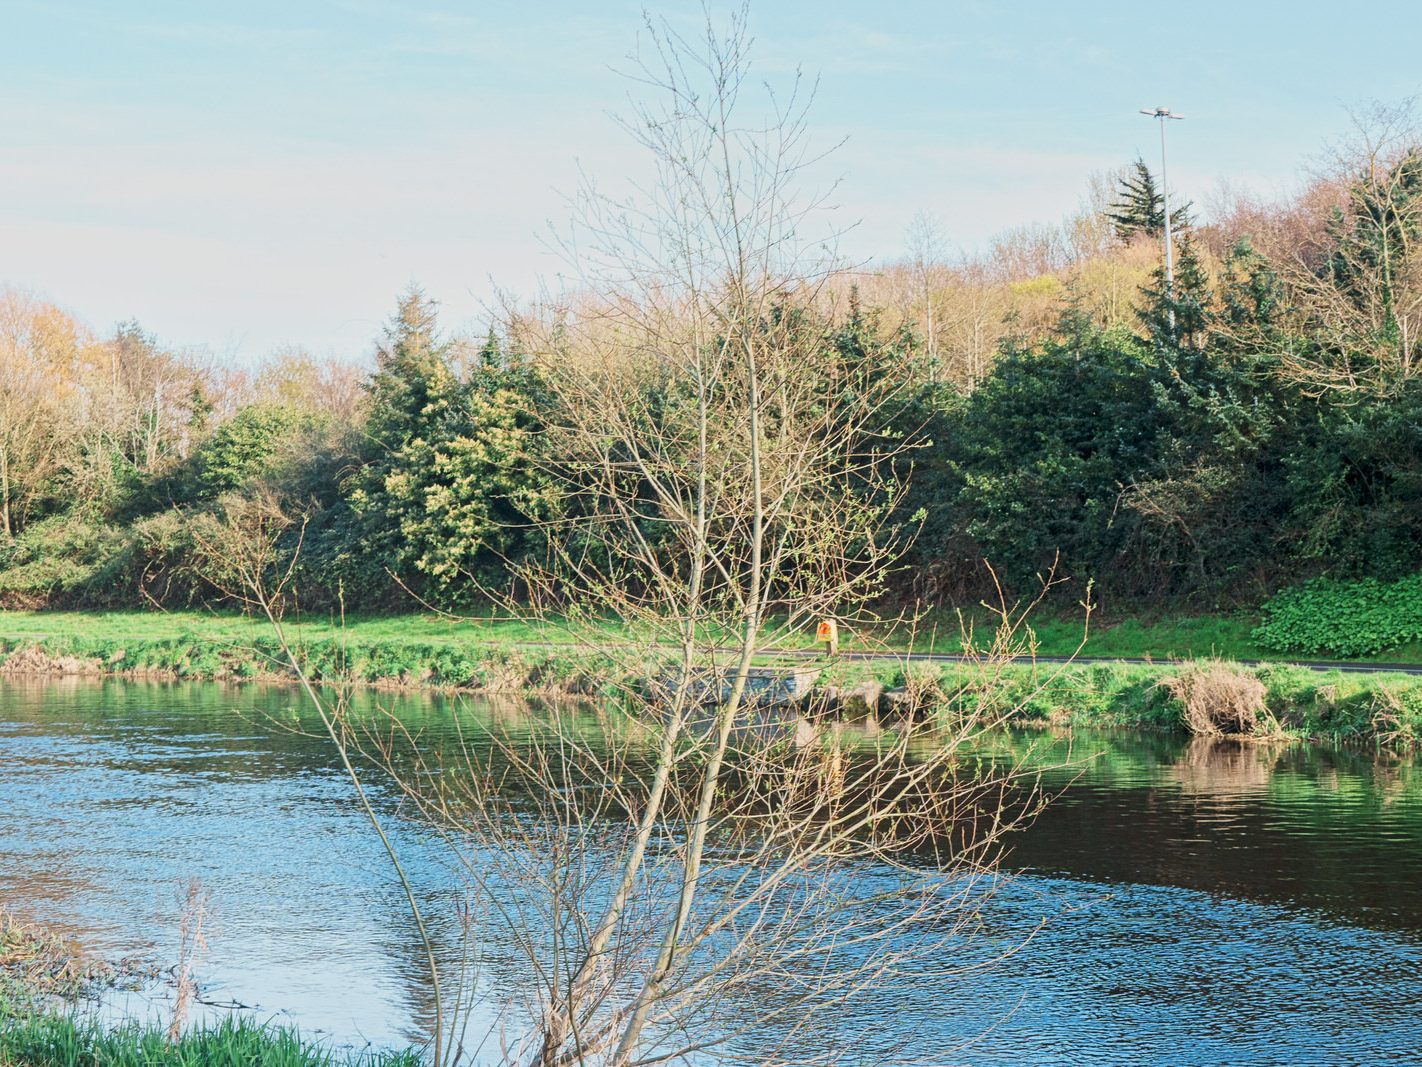 LIFFEY VALLEY PARK AT CHAPELIZOD ON THE NORTH SIDE OF THE RIVER [ACROSS THE ROAD FROM THE ENTRANCE TO PHOENIX PARK]-223384-1